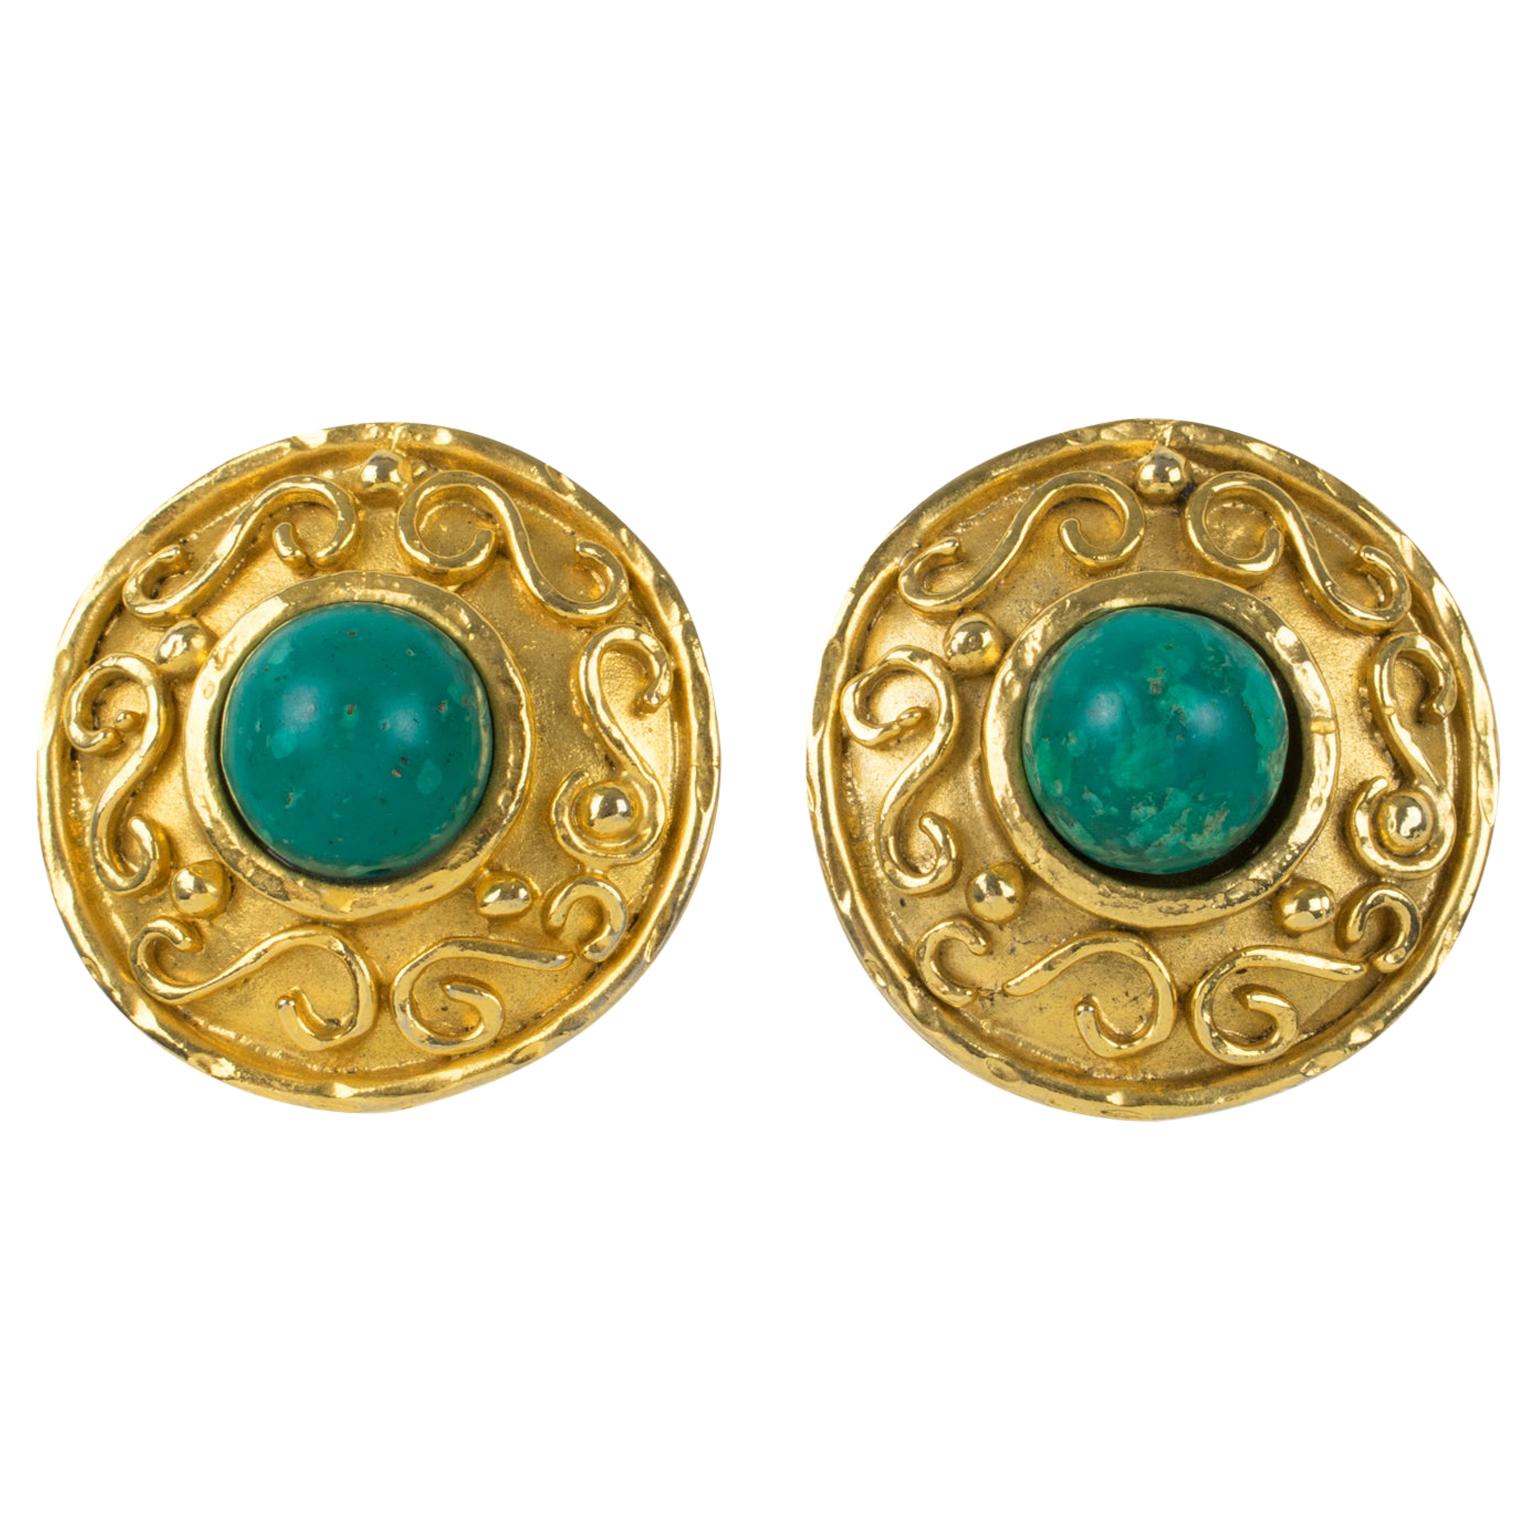 Edouard Rambaud Paris Clip Earrings with Turquoise Resin Cabochon For Sale